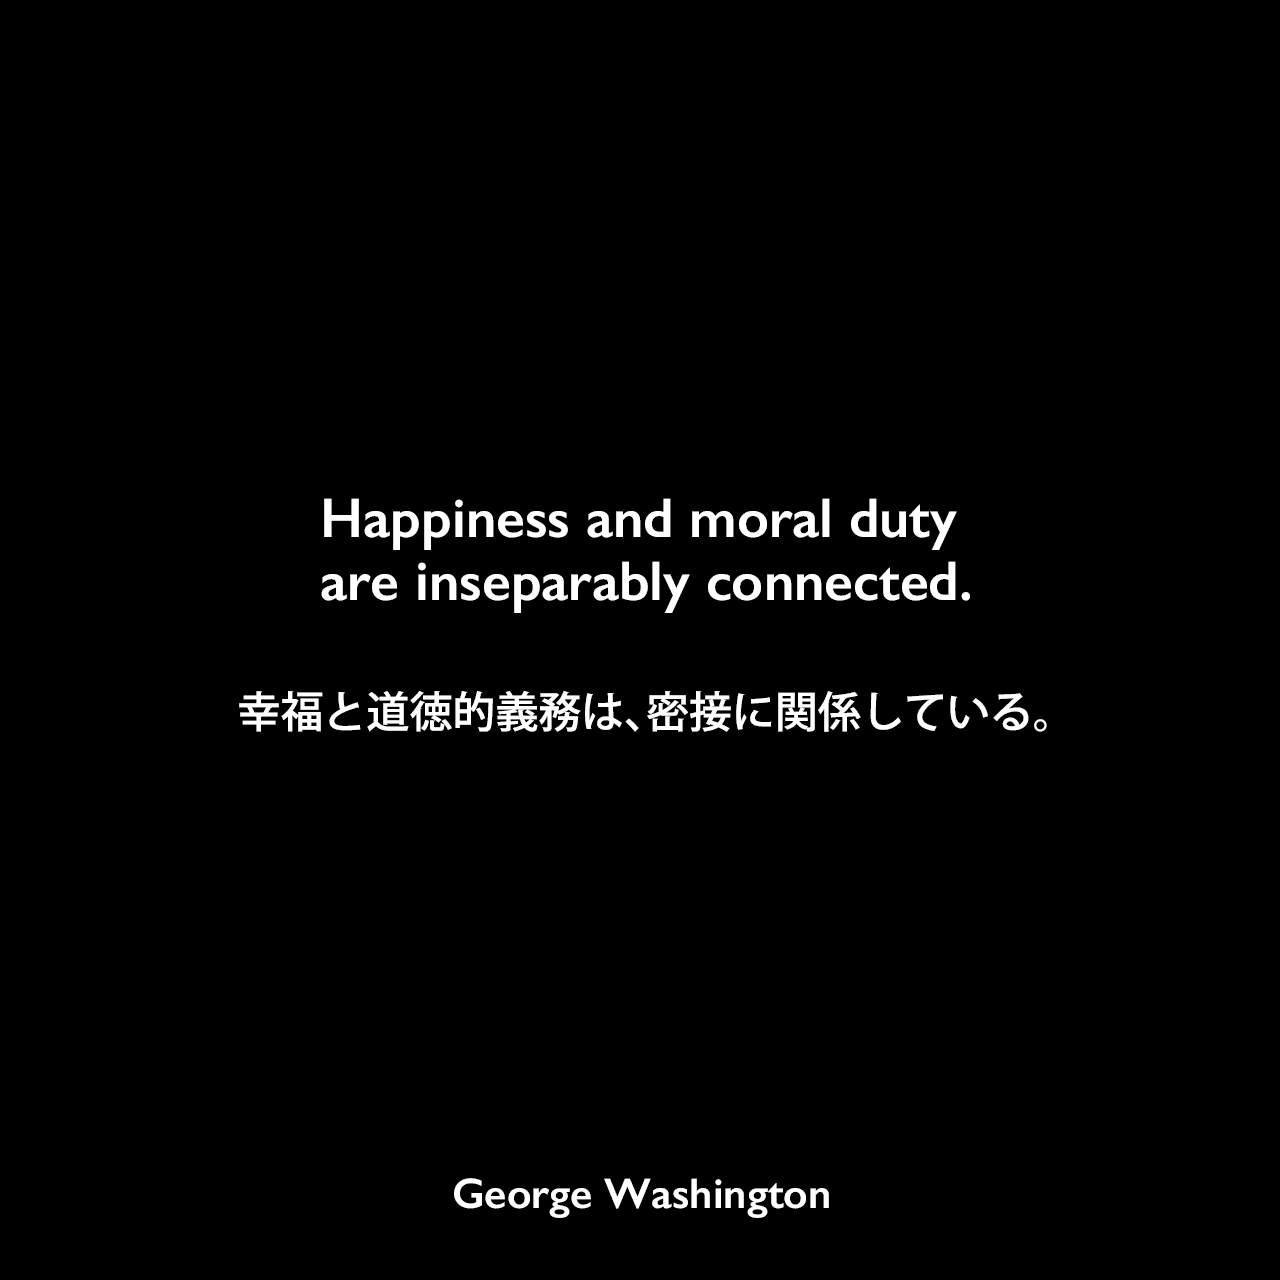 Happiness and moral duty are inseparably connected.幸福と道徳的義務は、密接に関係している。- 米国聖公会へ宛てた手紙よりGeorge Washington